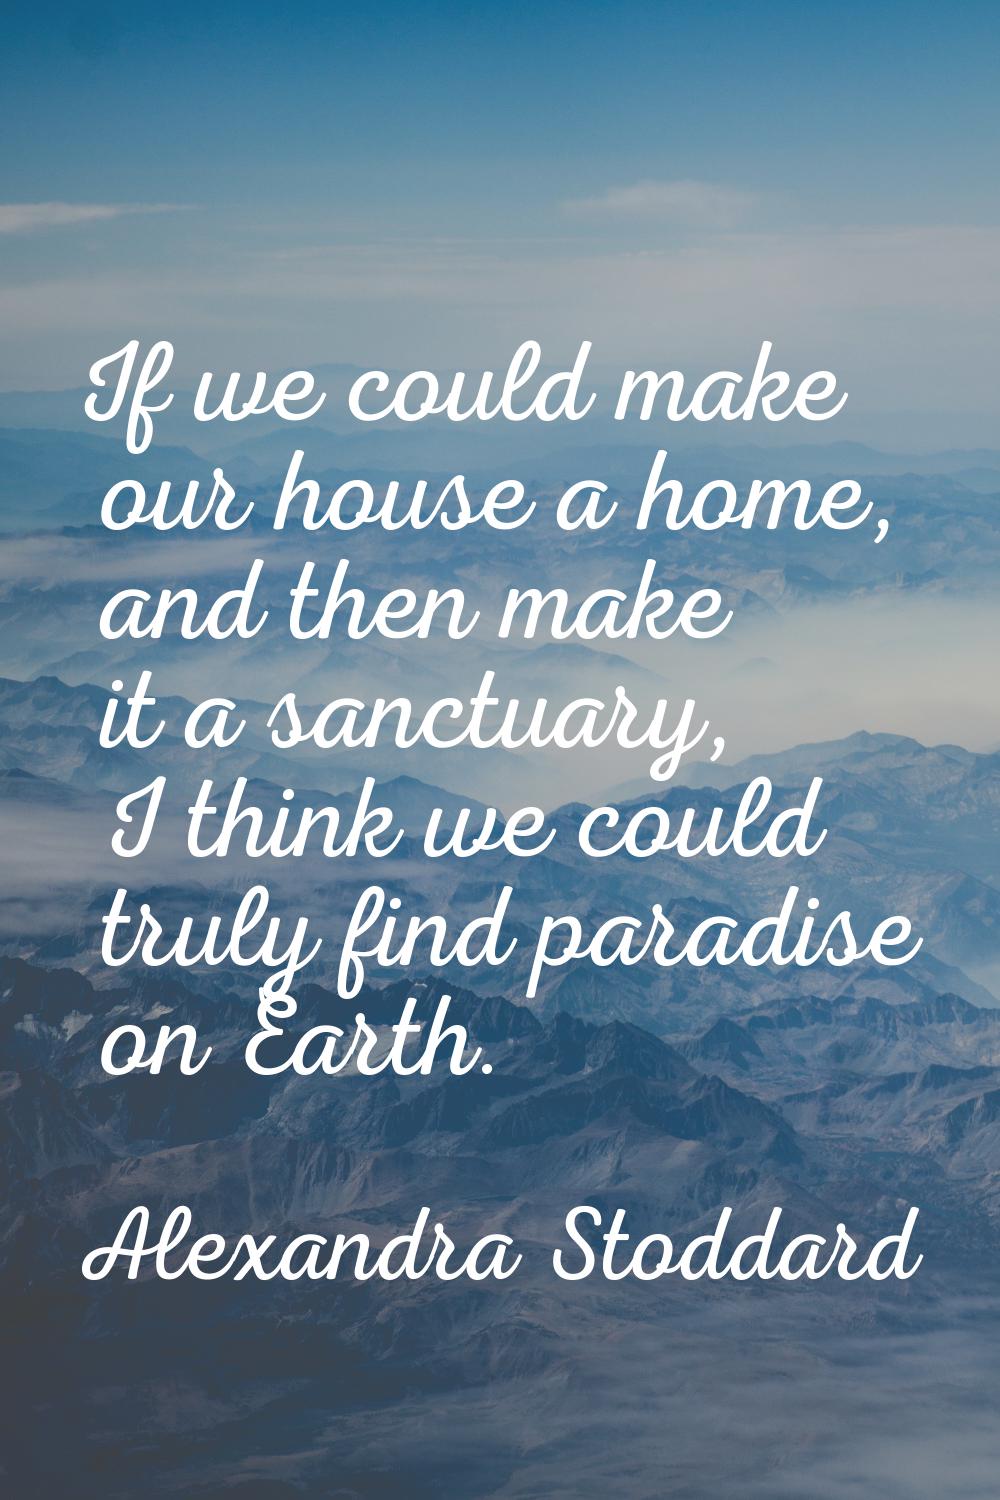 If we could make our house a home, and then make it a sanctuary, I think we could truly find paradi